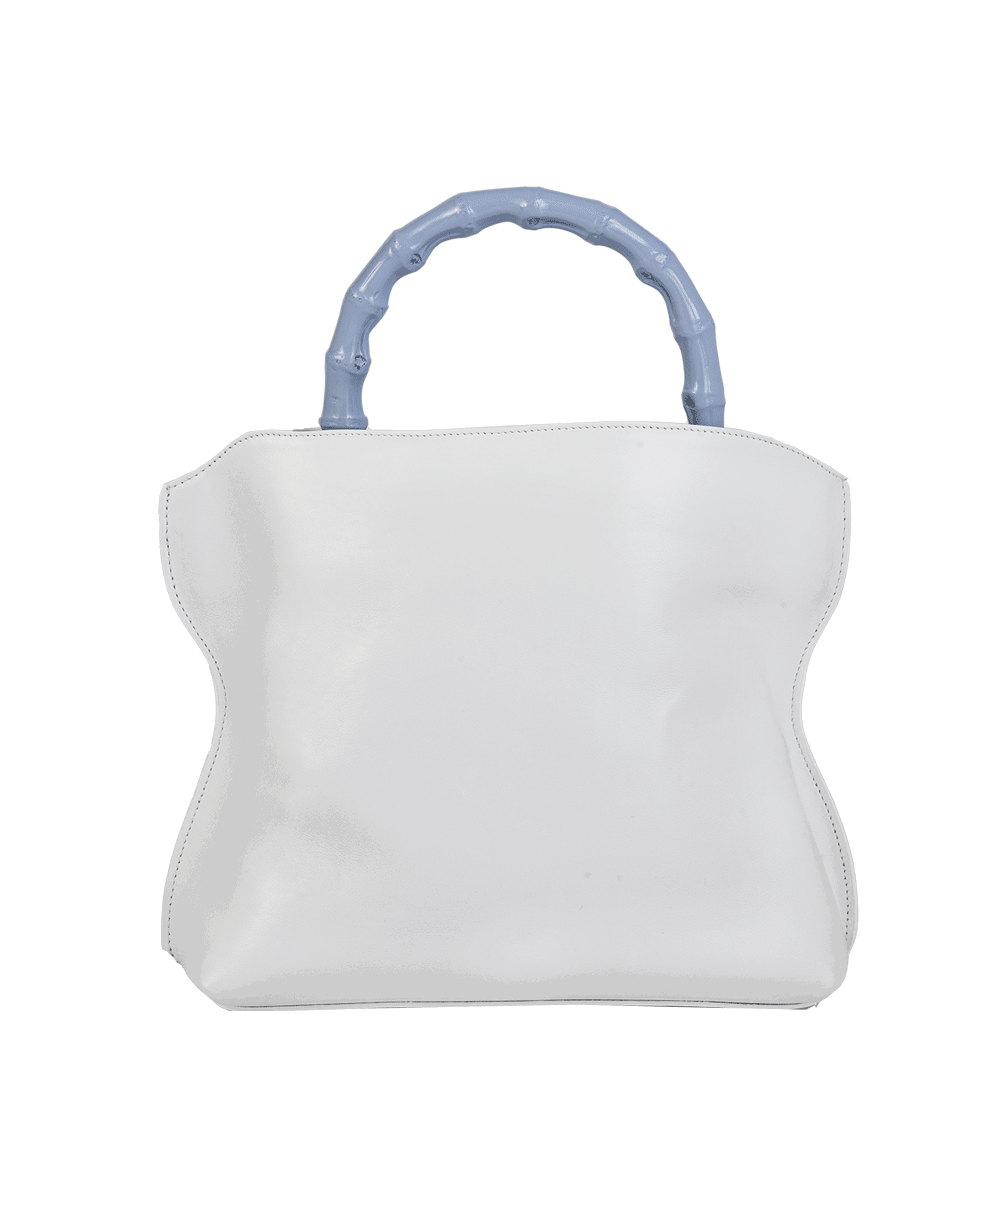 Cross-body bag in calf leather with detachable shoulder strap. Bamboo handles. Made In Italy. Two compartments, zip pocket in the back compartment. Magnetic flap closure with logo. Color: Ivory. Size: Large